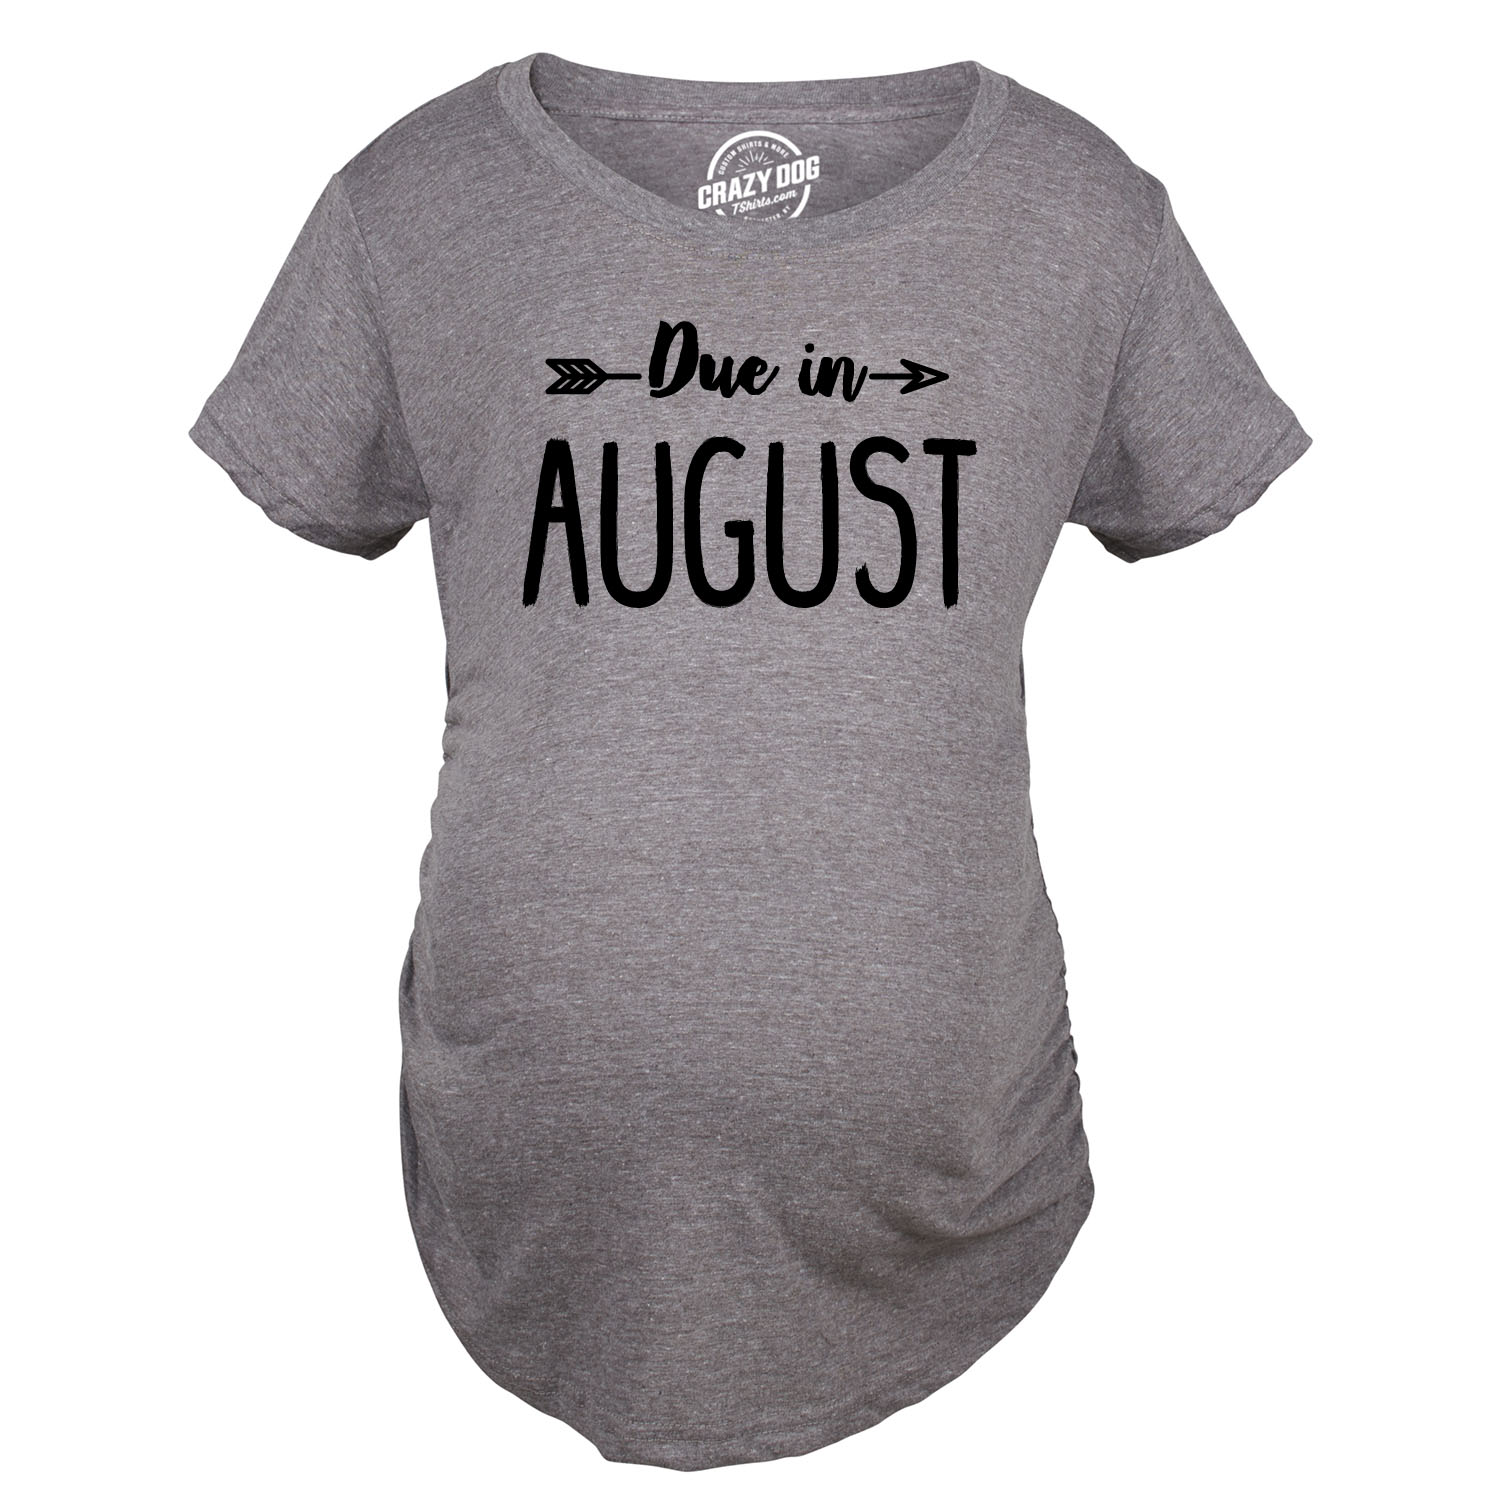 Maternity Due In August Funny T shirts Pregnant Shirts Announce Pregnancy Month Shirt - image 2 of 9